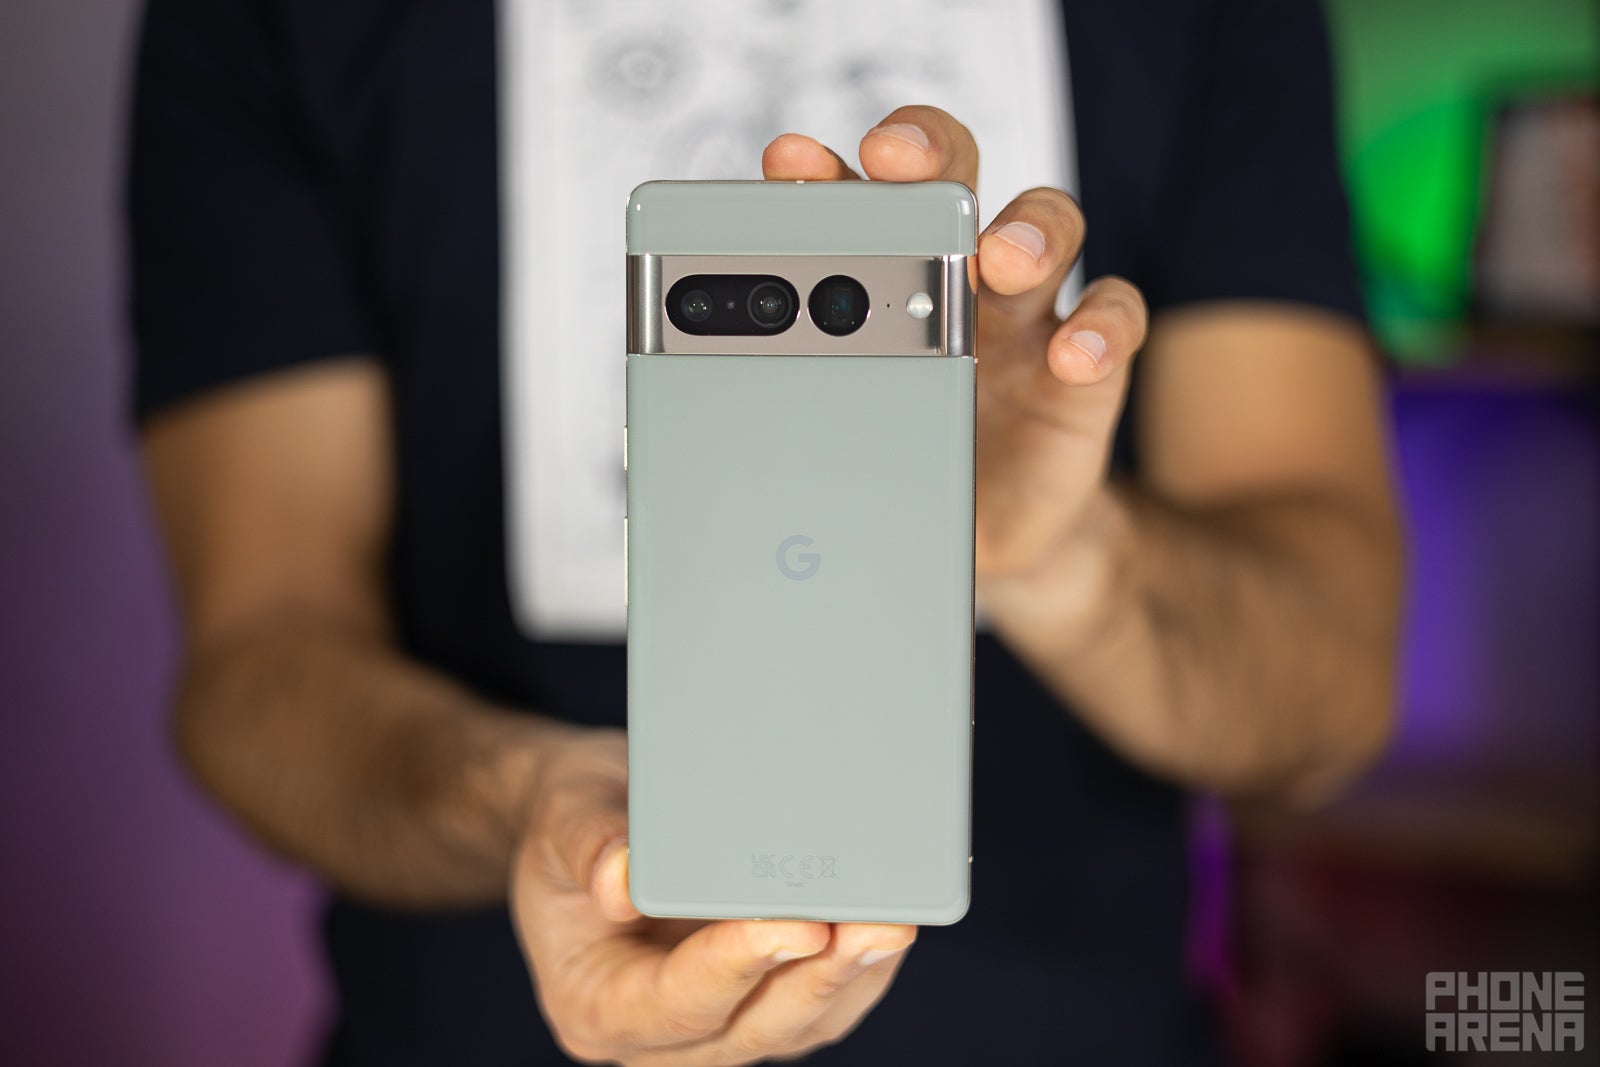 The Google Pixel 7 Pro’s camera bump is quite unique, and also shared with the Pixel 7. - Black Friday is here with Visible and offers a new iPhone SE or a Google Pixel 7 with up to $400 off!